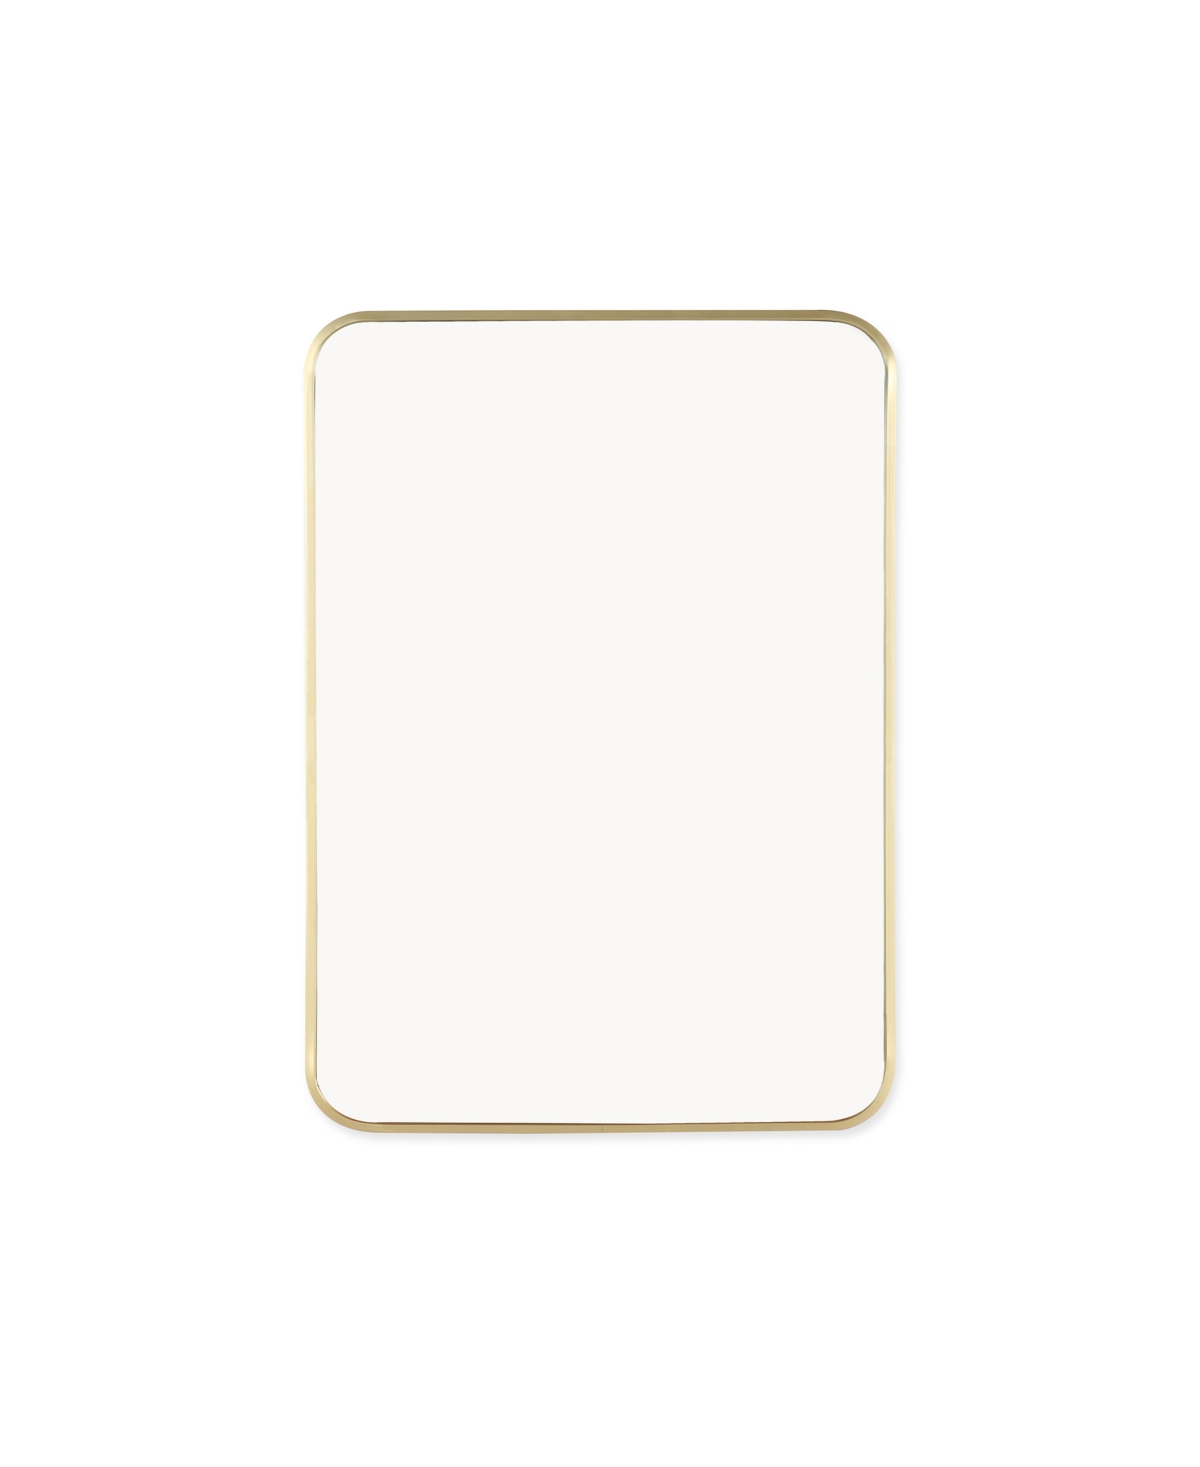 Mirrorize Rounded Rectangle Bathroom Framed Decorative Wall Mirror, 27.5" X 19.7" In Gold